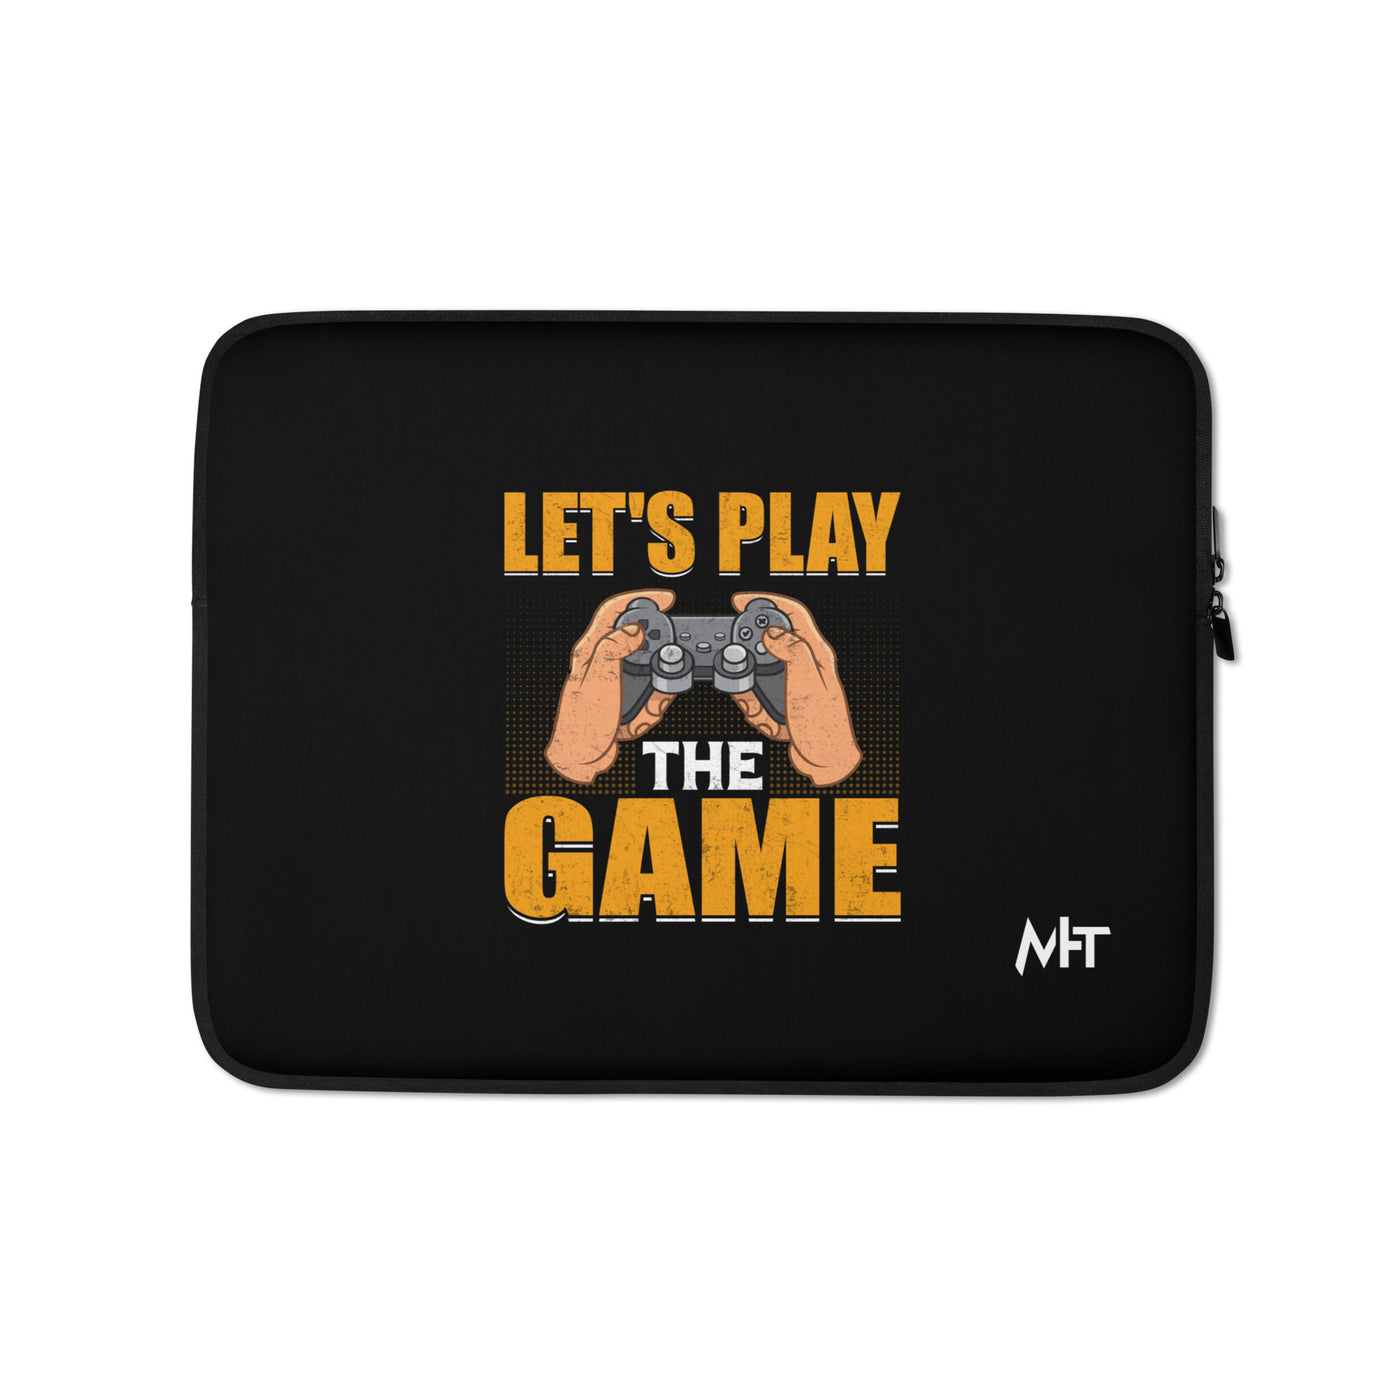 Let's Play the Game - Laptop Sleeve